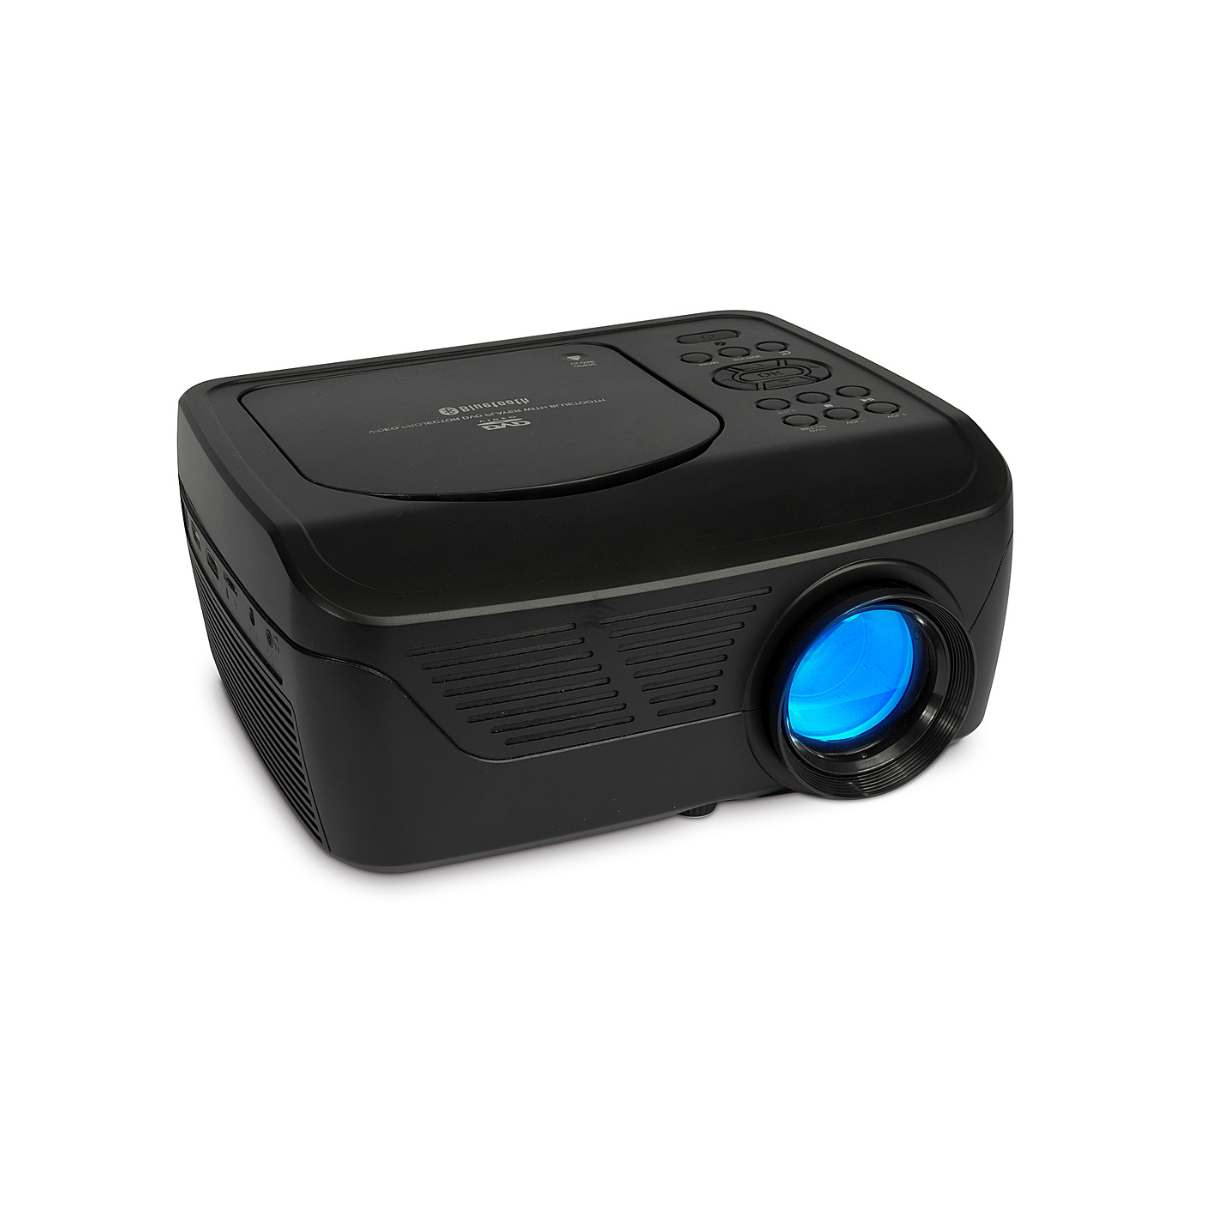 GPX Mini Projector With Bluetooth: How To Connect To Phone